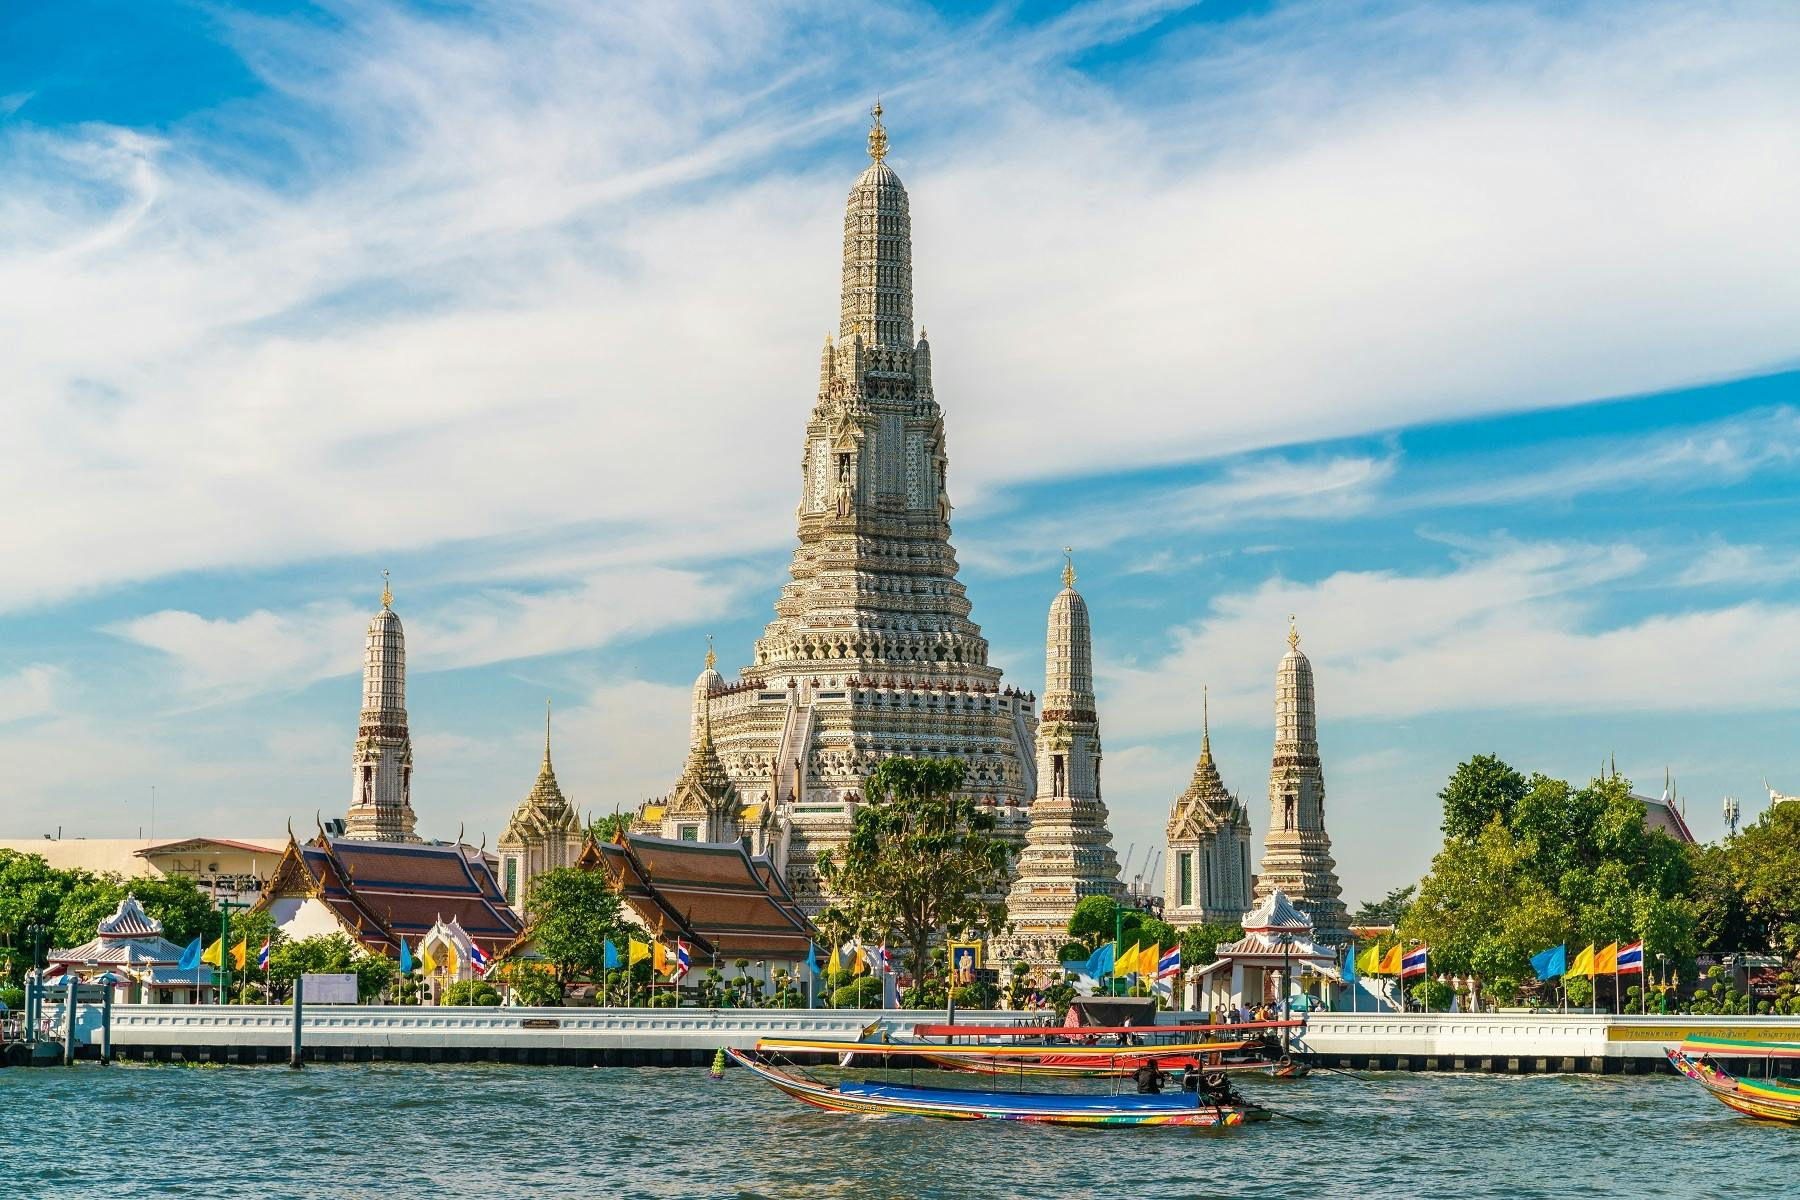 Guided tour of tastes and temples along the Chao Phraya